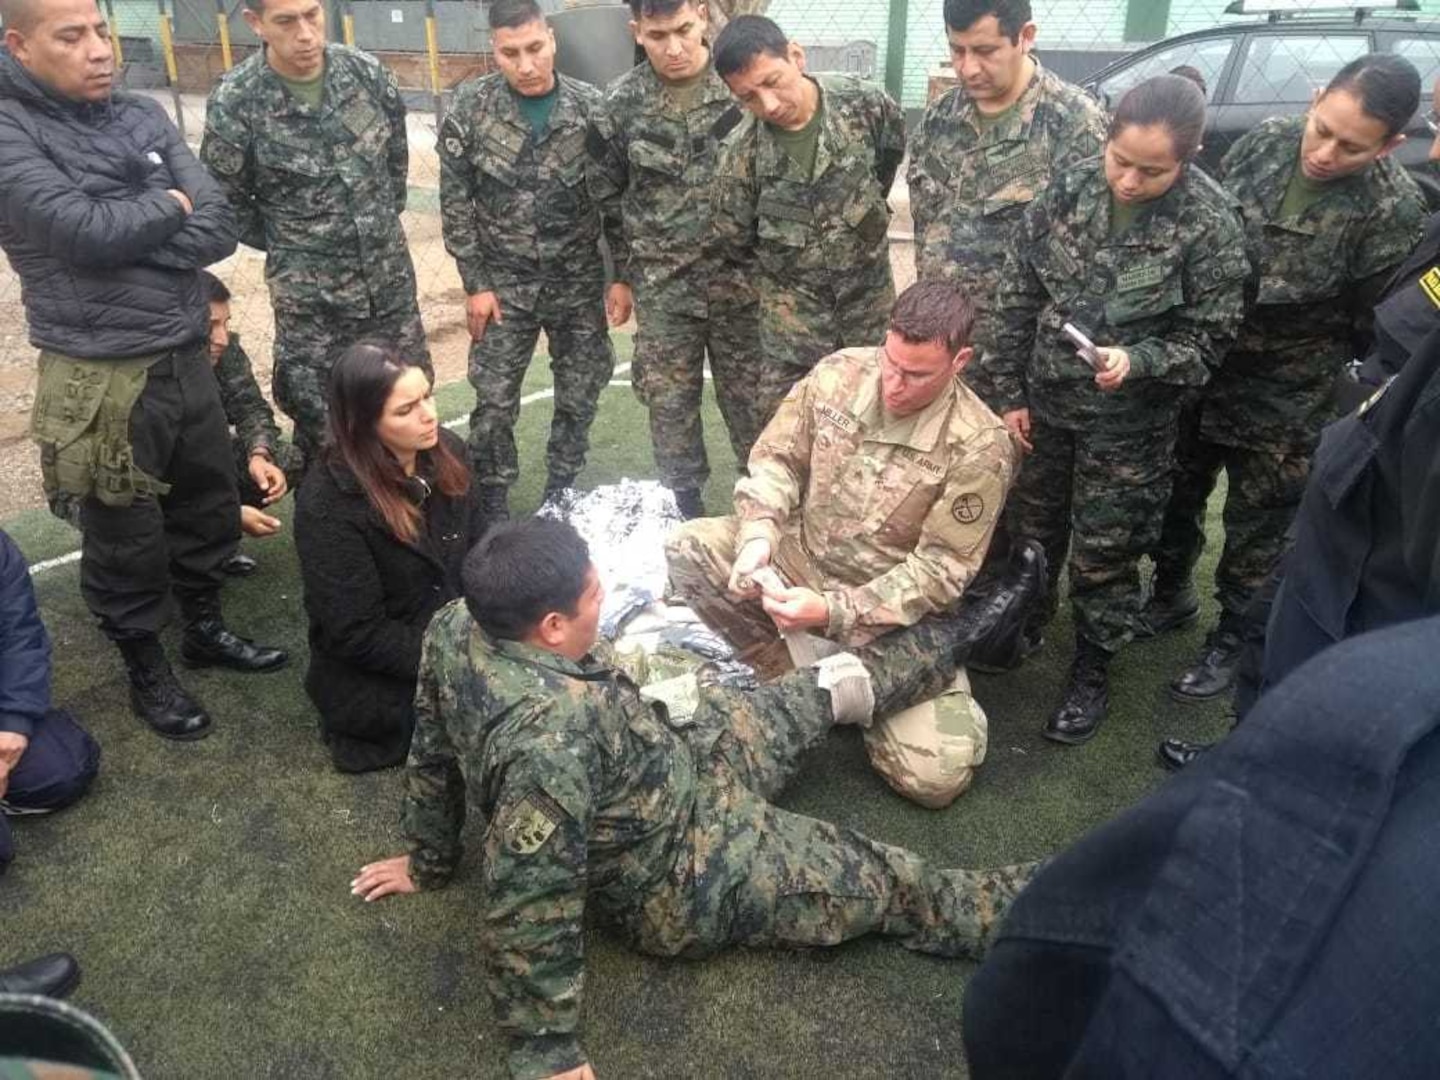 Sgt. Brad Miller, a medical readiness non-commissioned officer with the West Virginia Army National Guard (WVARNG) medical detachment, provides training on tactical casualty combat care (TCCC) to members of the Peruvian Armed Forces during a hands-on training held July 2, 2019, in Lima, Peru. Members of the WVARNG trained more than 120 members of the Peruvian Armed Forces and the Peruvian National Police on a variety of aeromedical topics during a week-long subject matter exchange. (Courtesy photo)